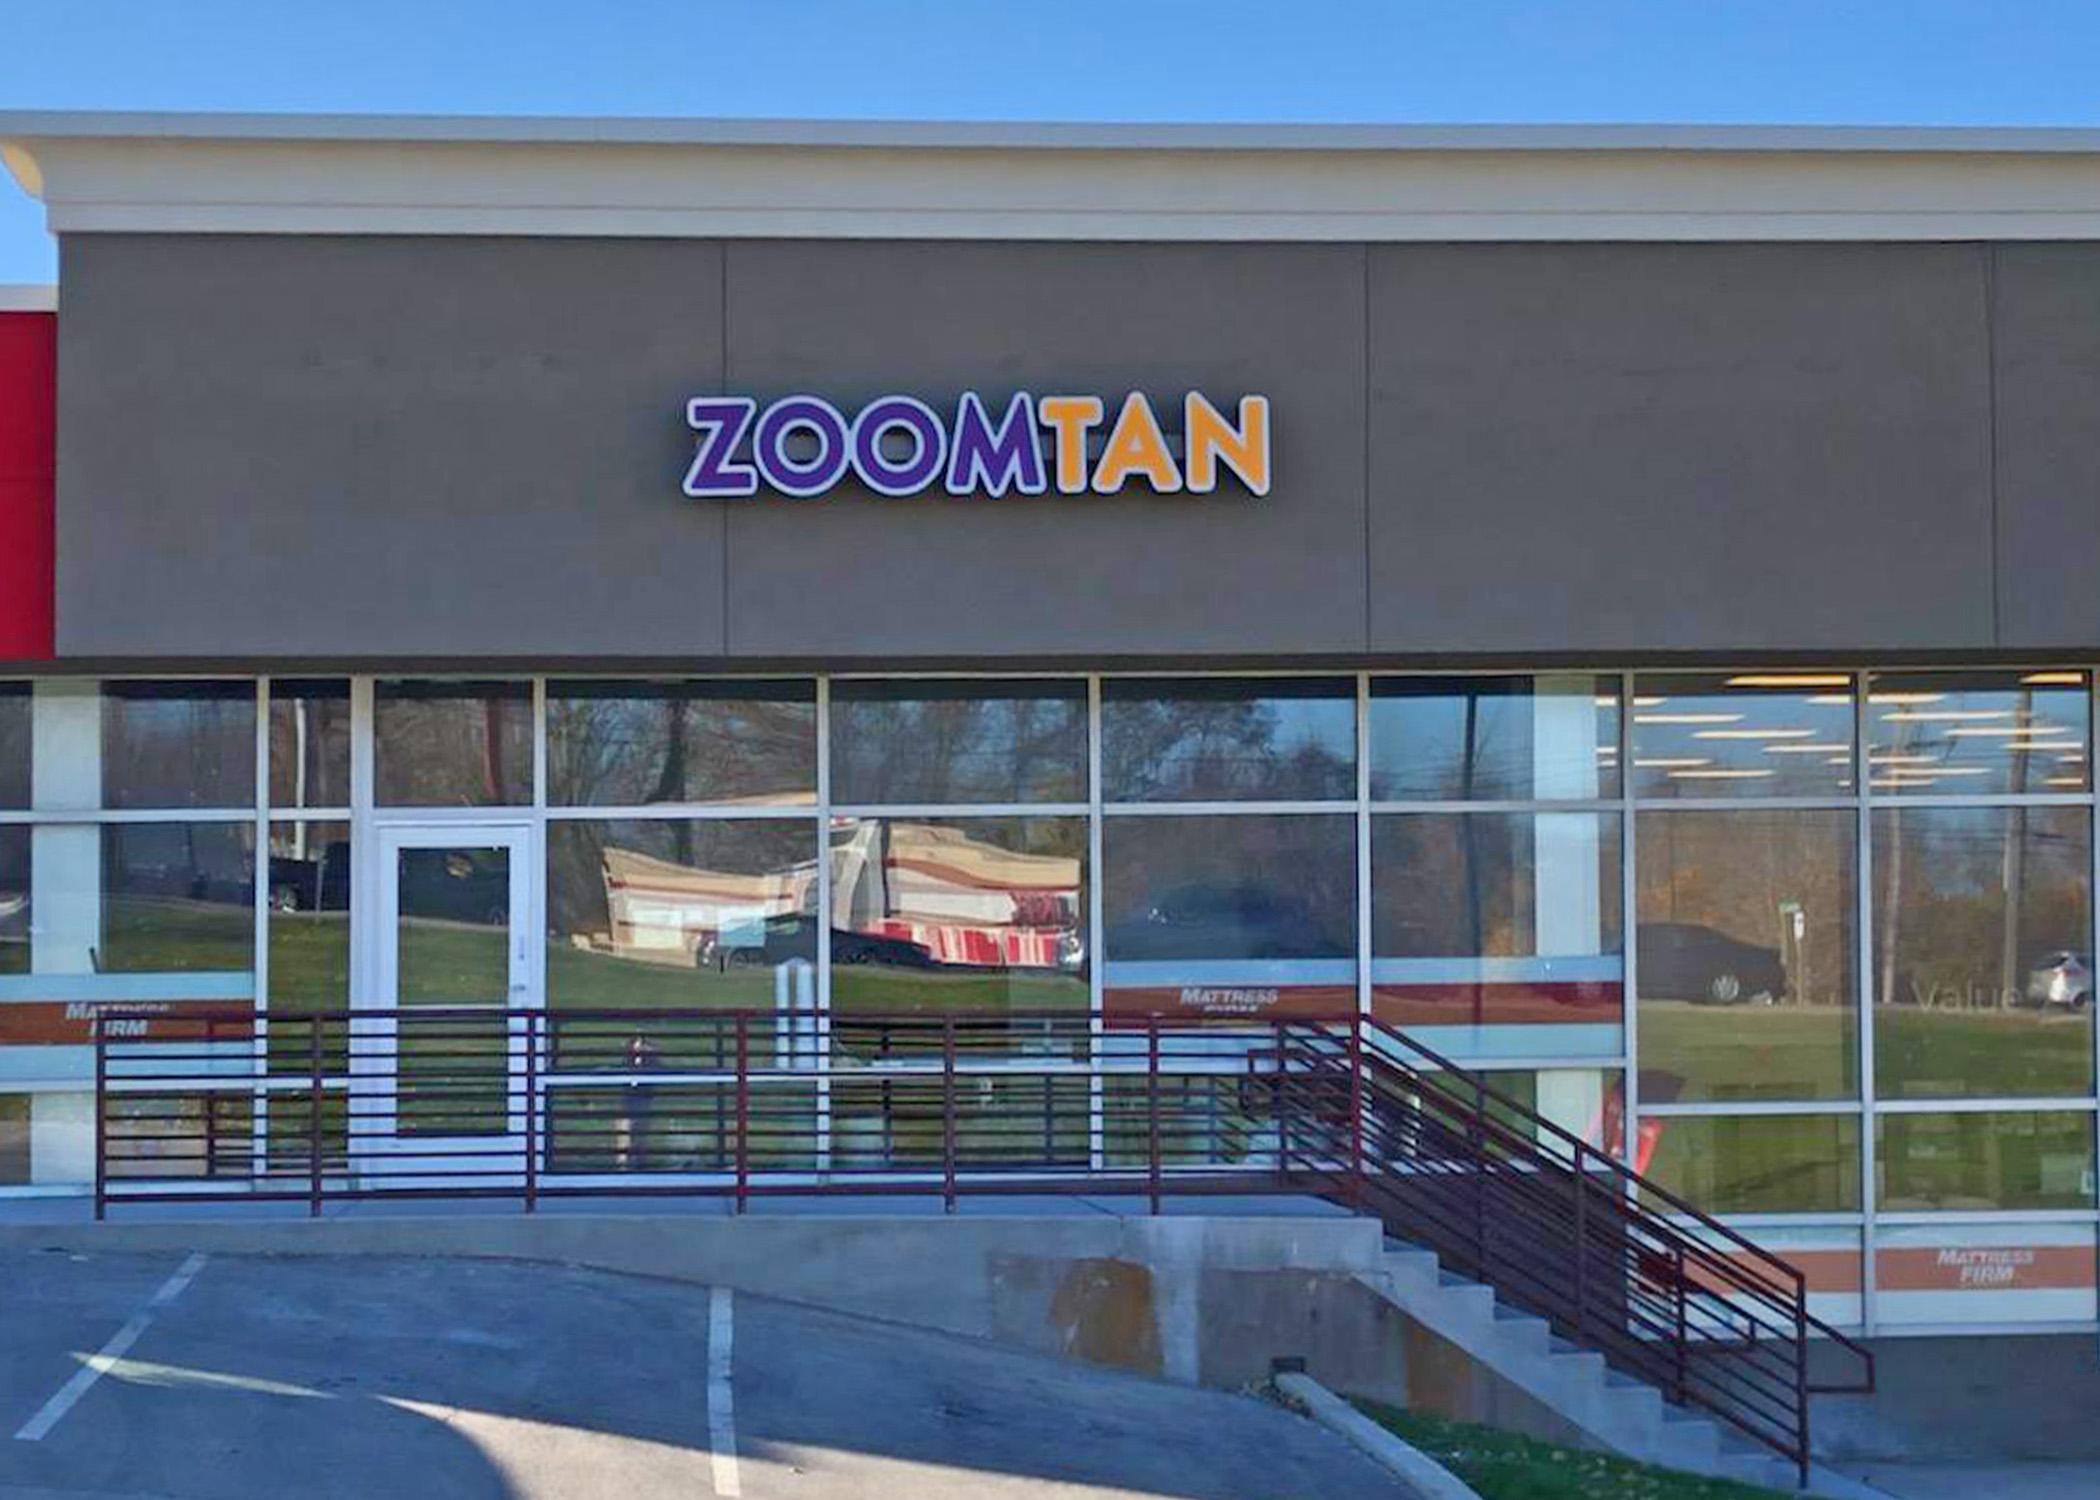 Zoom Tan store front on Peach Street in Erie, PA